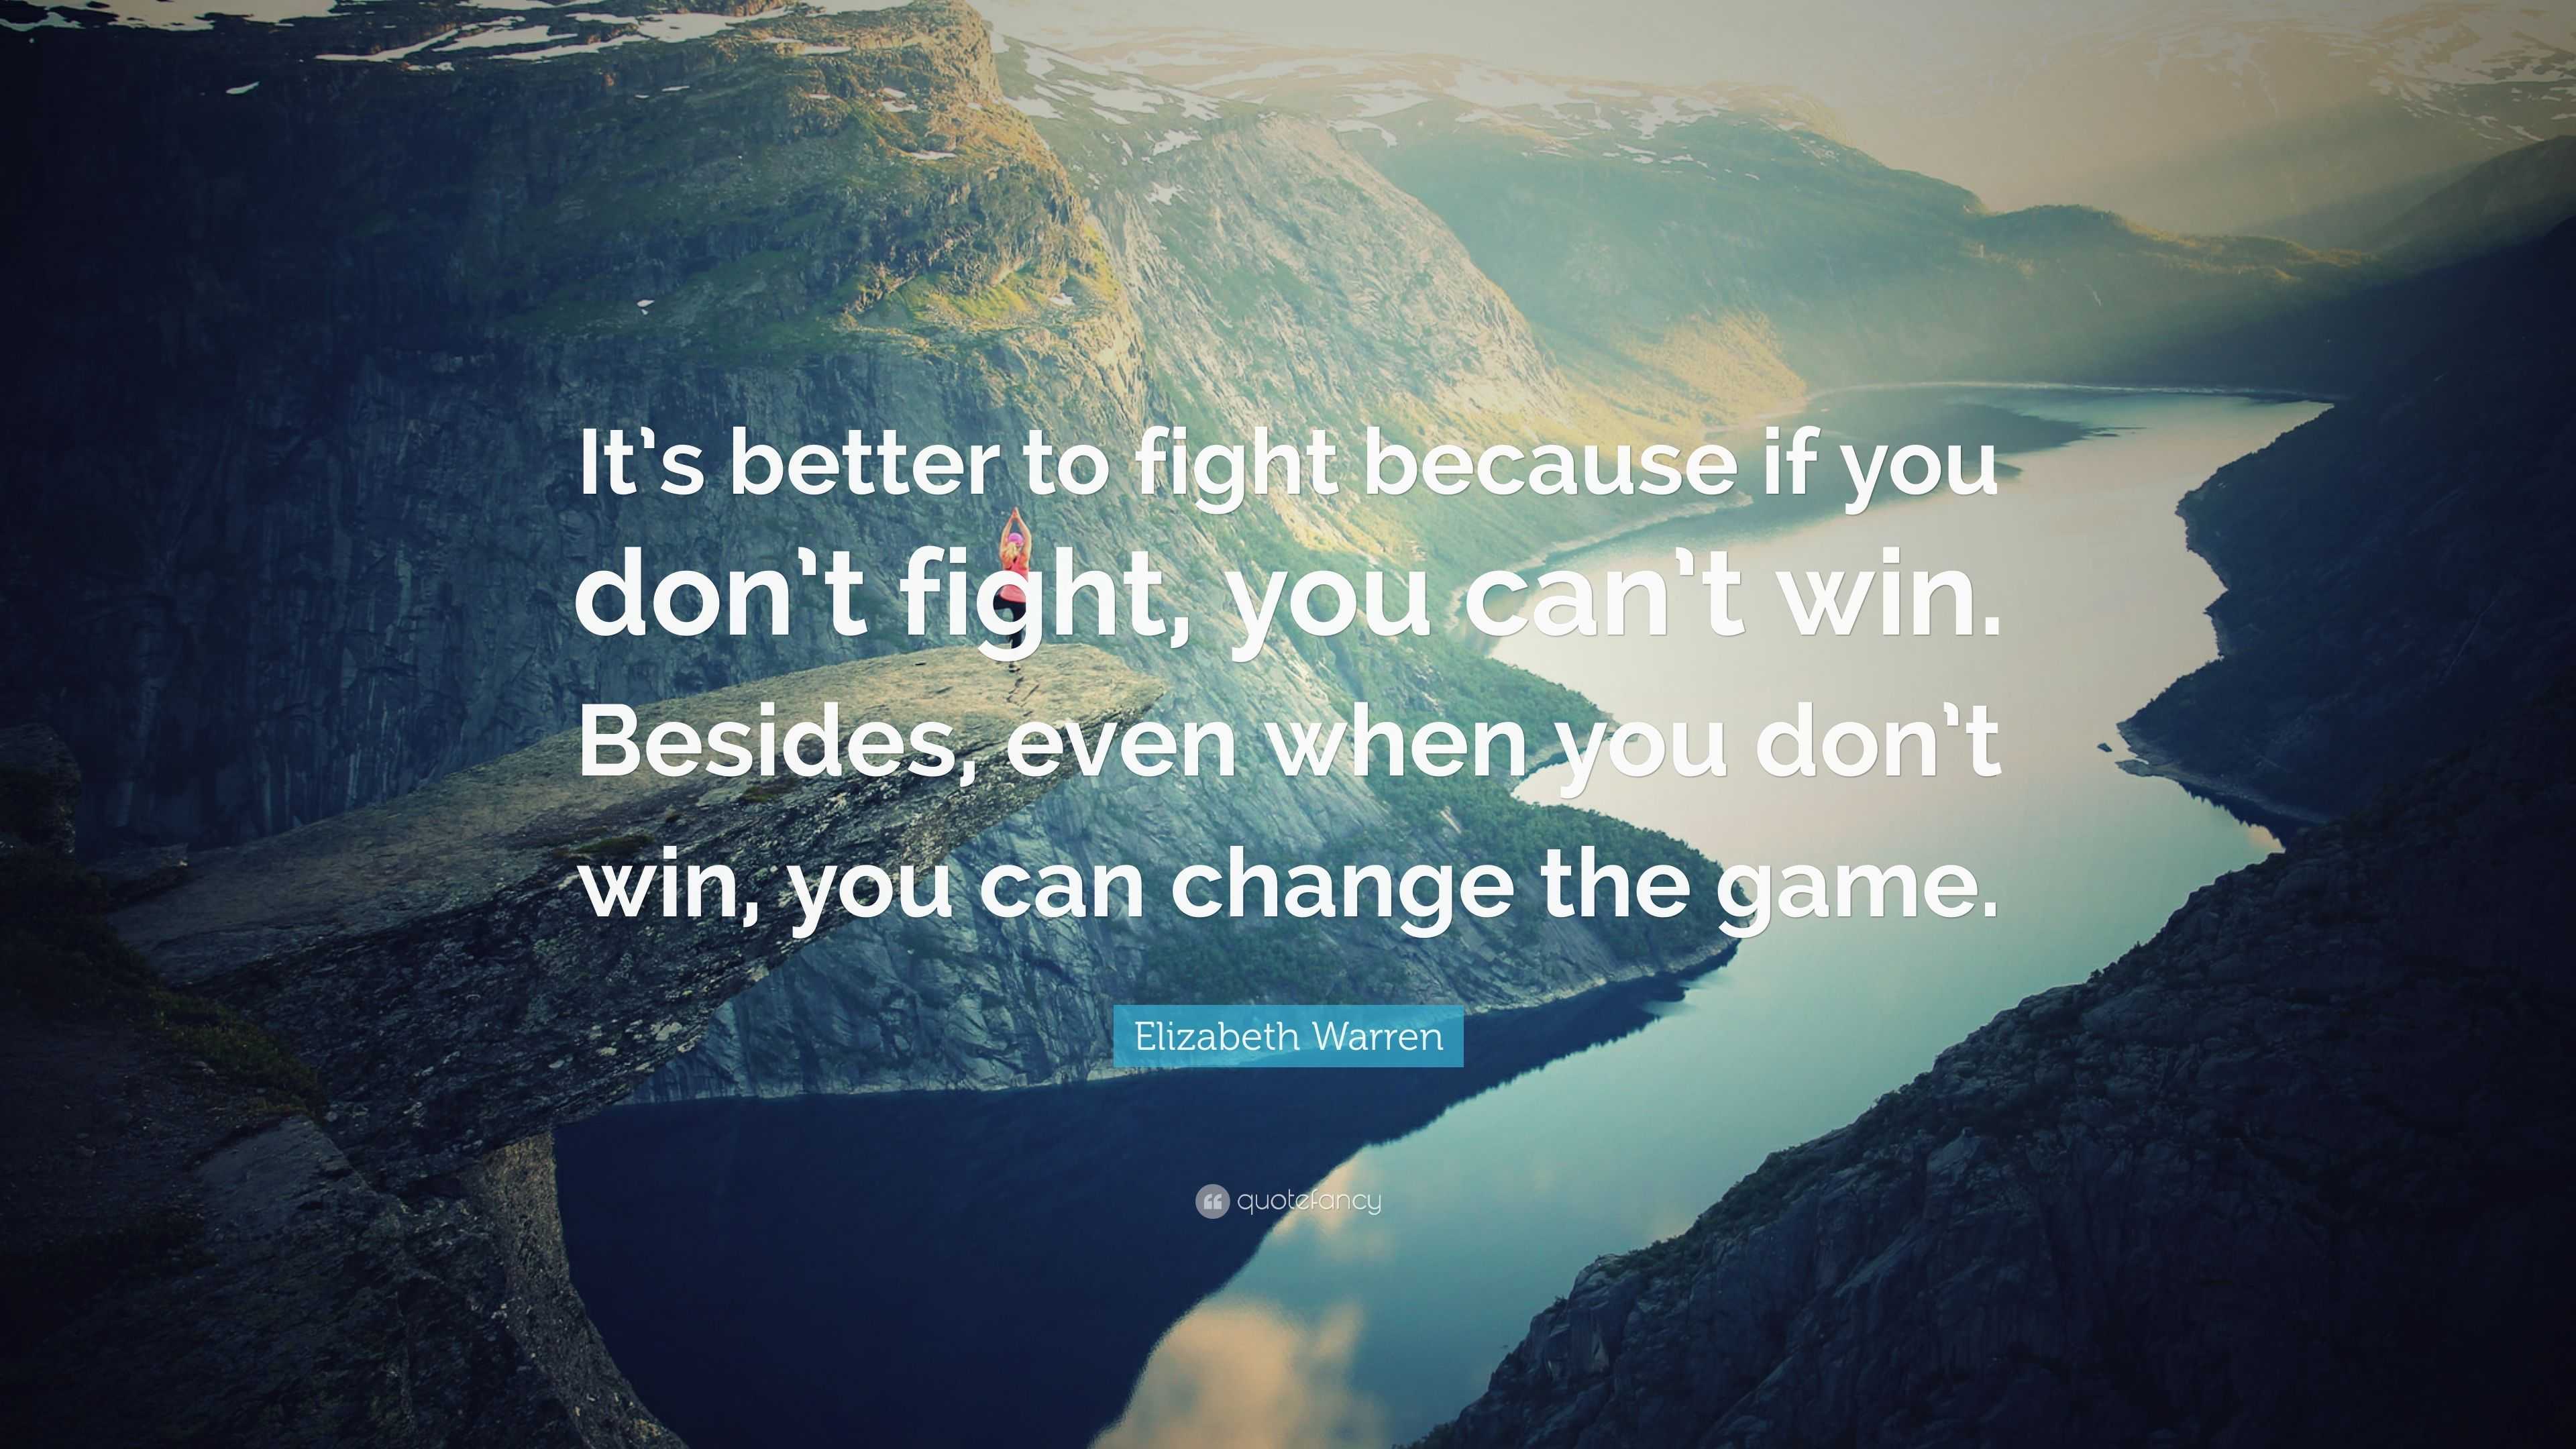 Elizabeth Warren Quote: “It’s better to fight because if you don’t ...